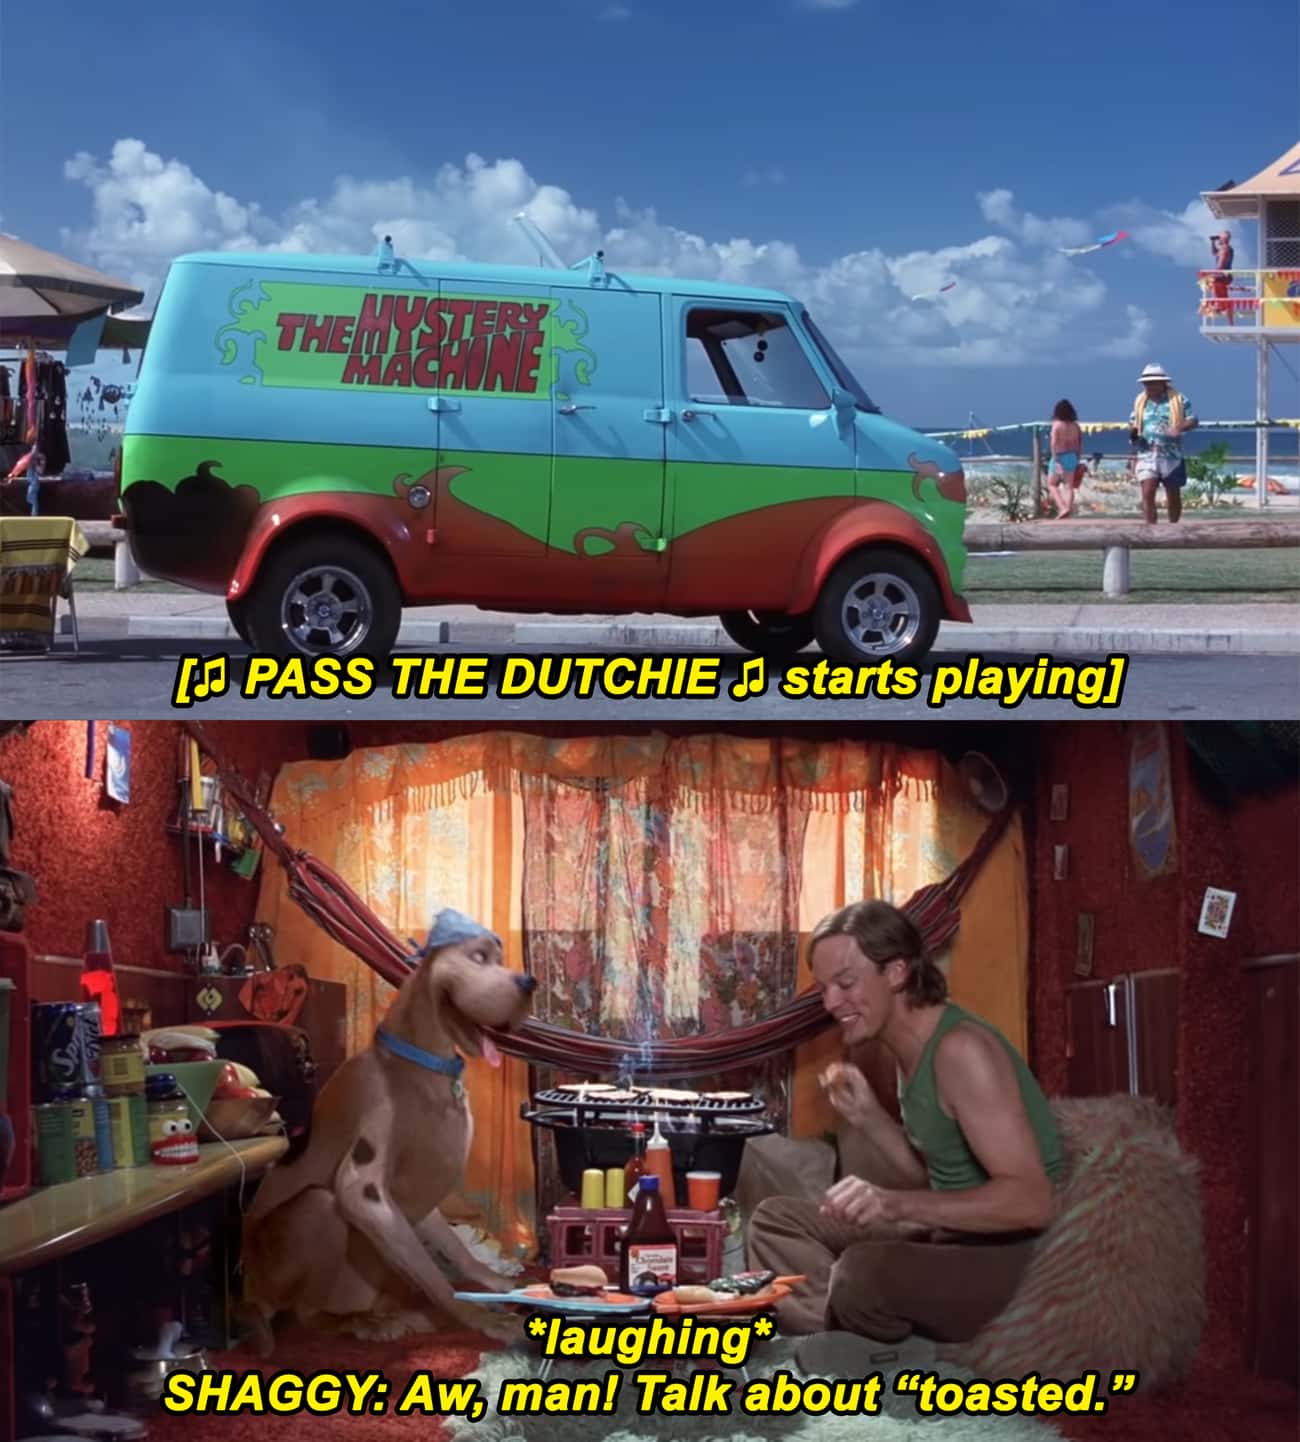 These Not-So-Subtle Stoner Allusions, Complete With Smoke Pouring Out Of The Mystery Machine Roof